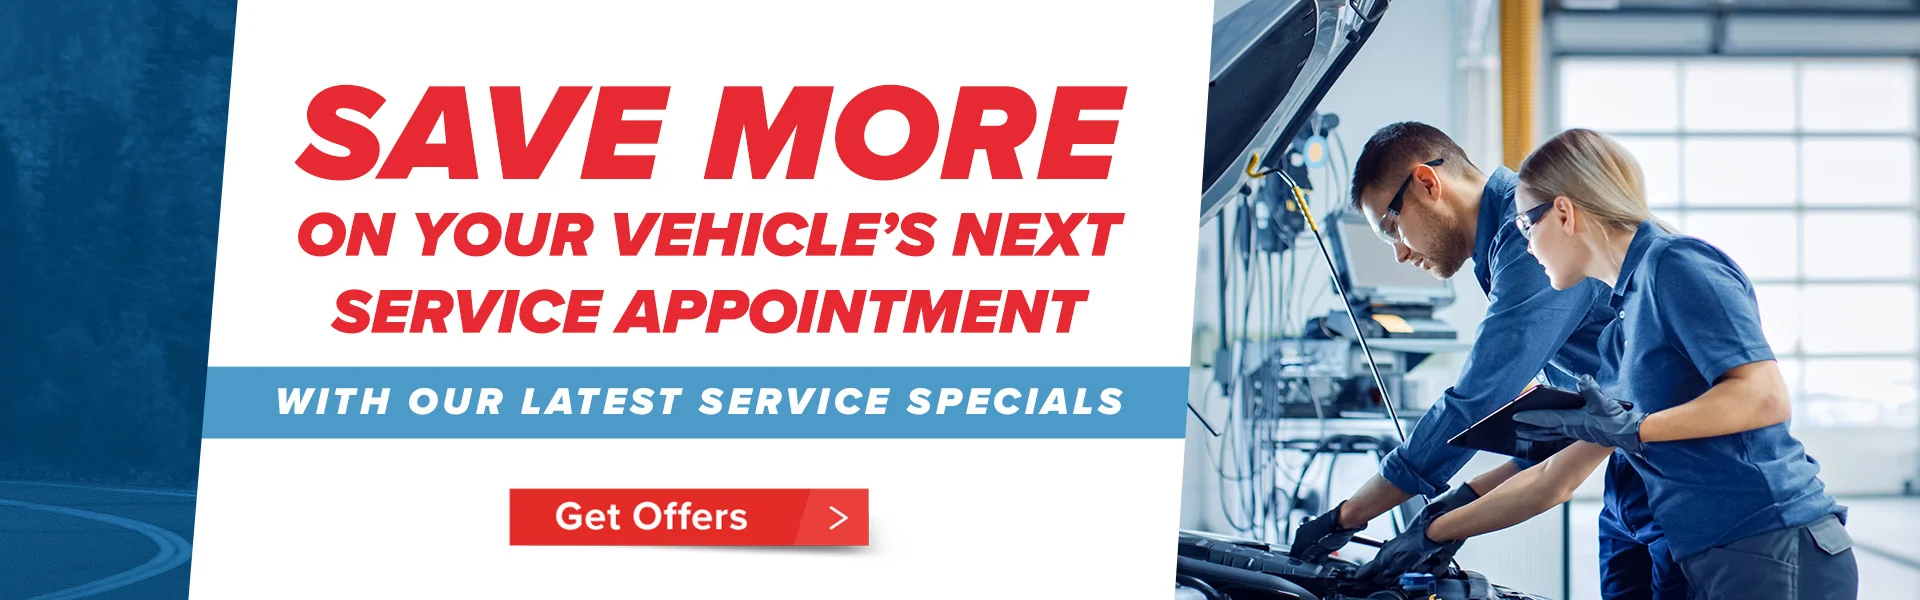 Save More With Our Latest Service Specials